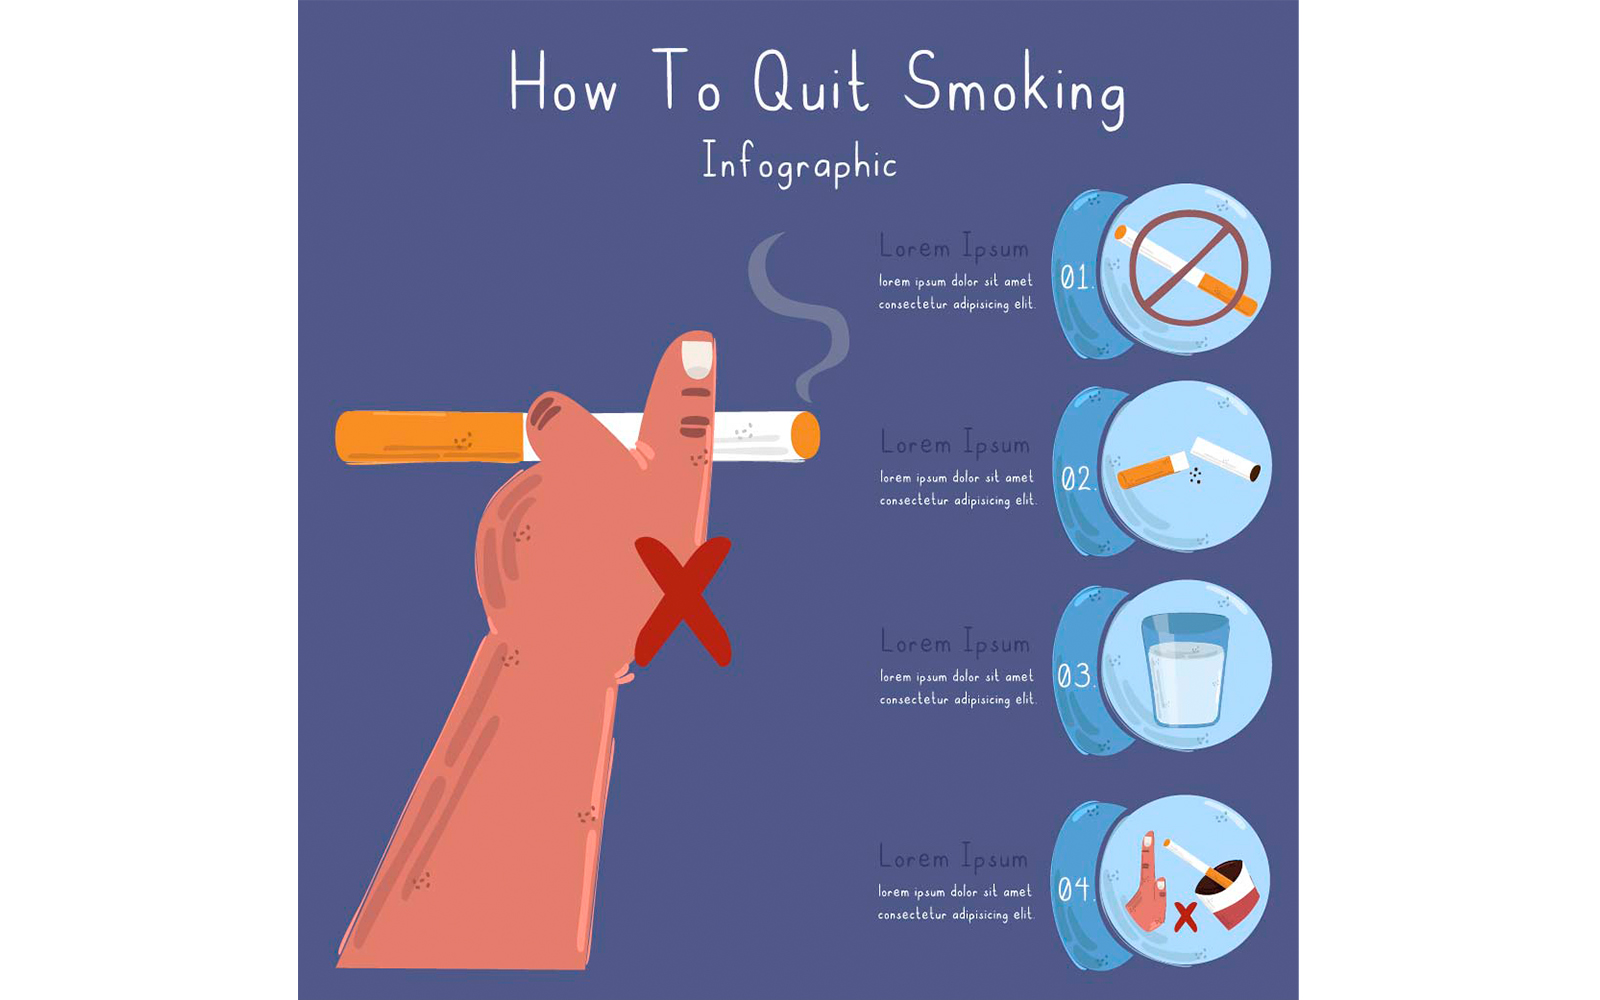 How to Quit Smoking Infographic Illustration